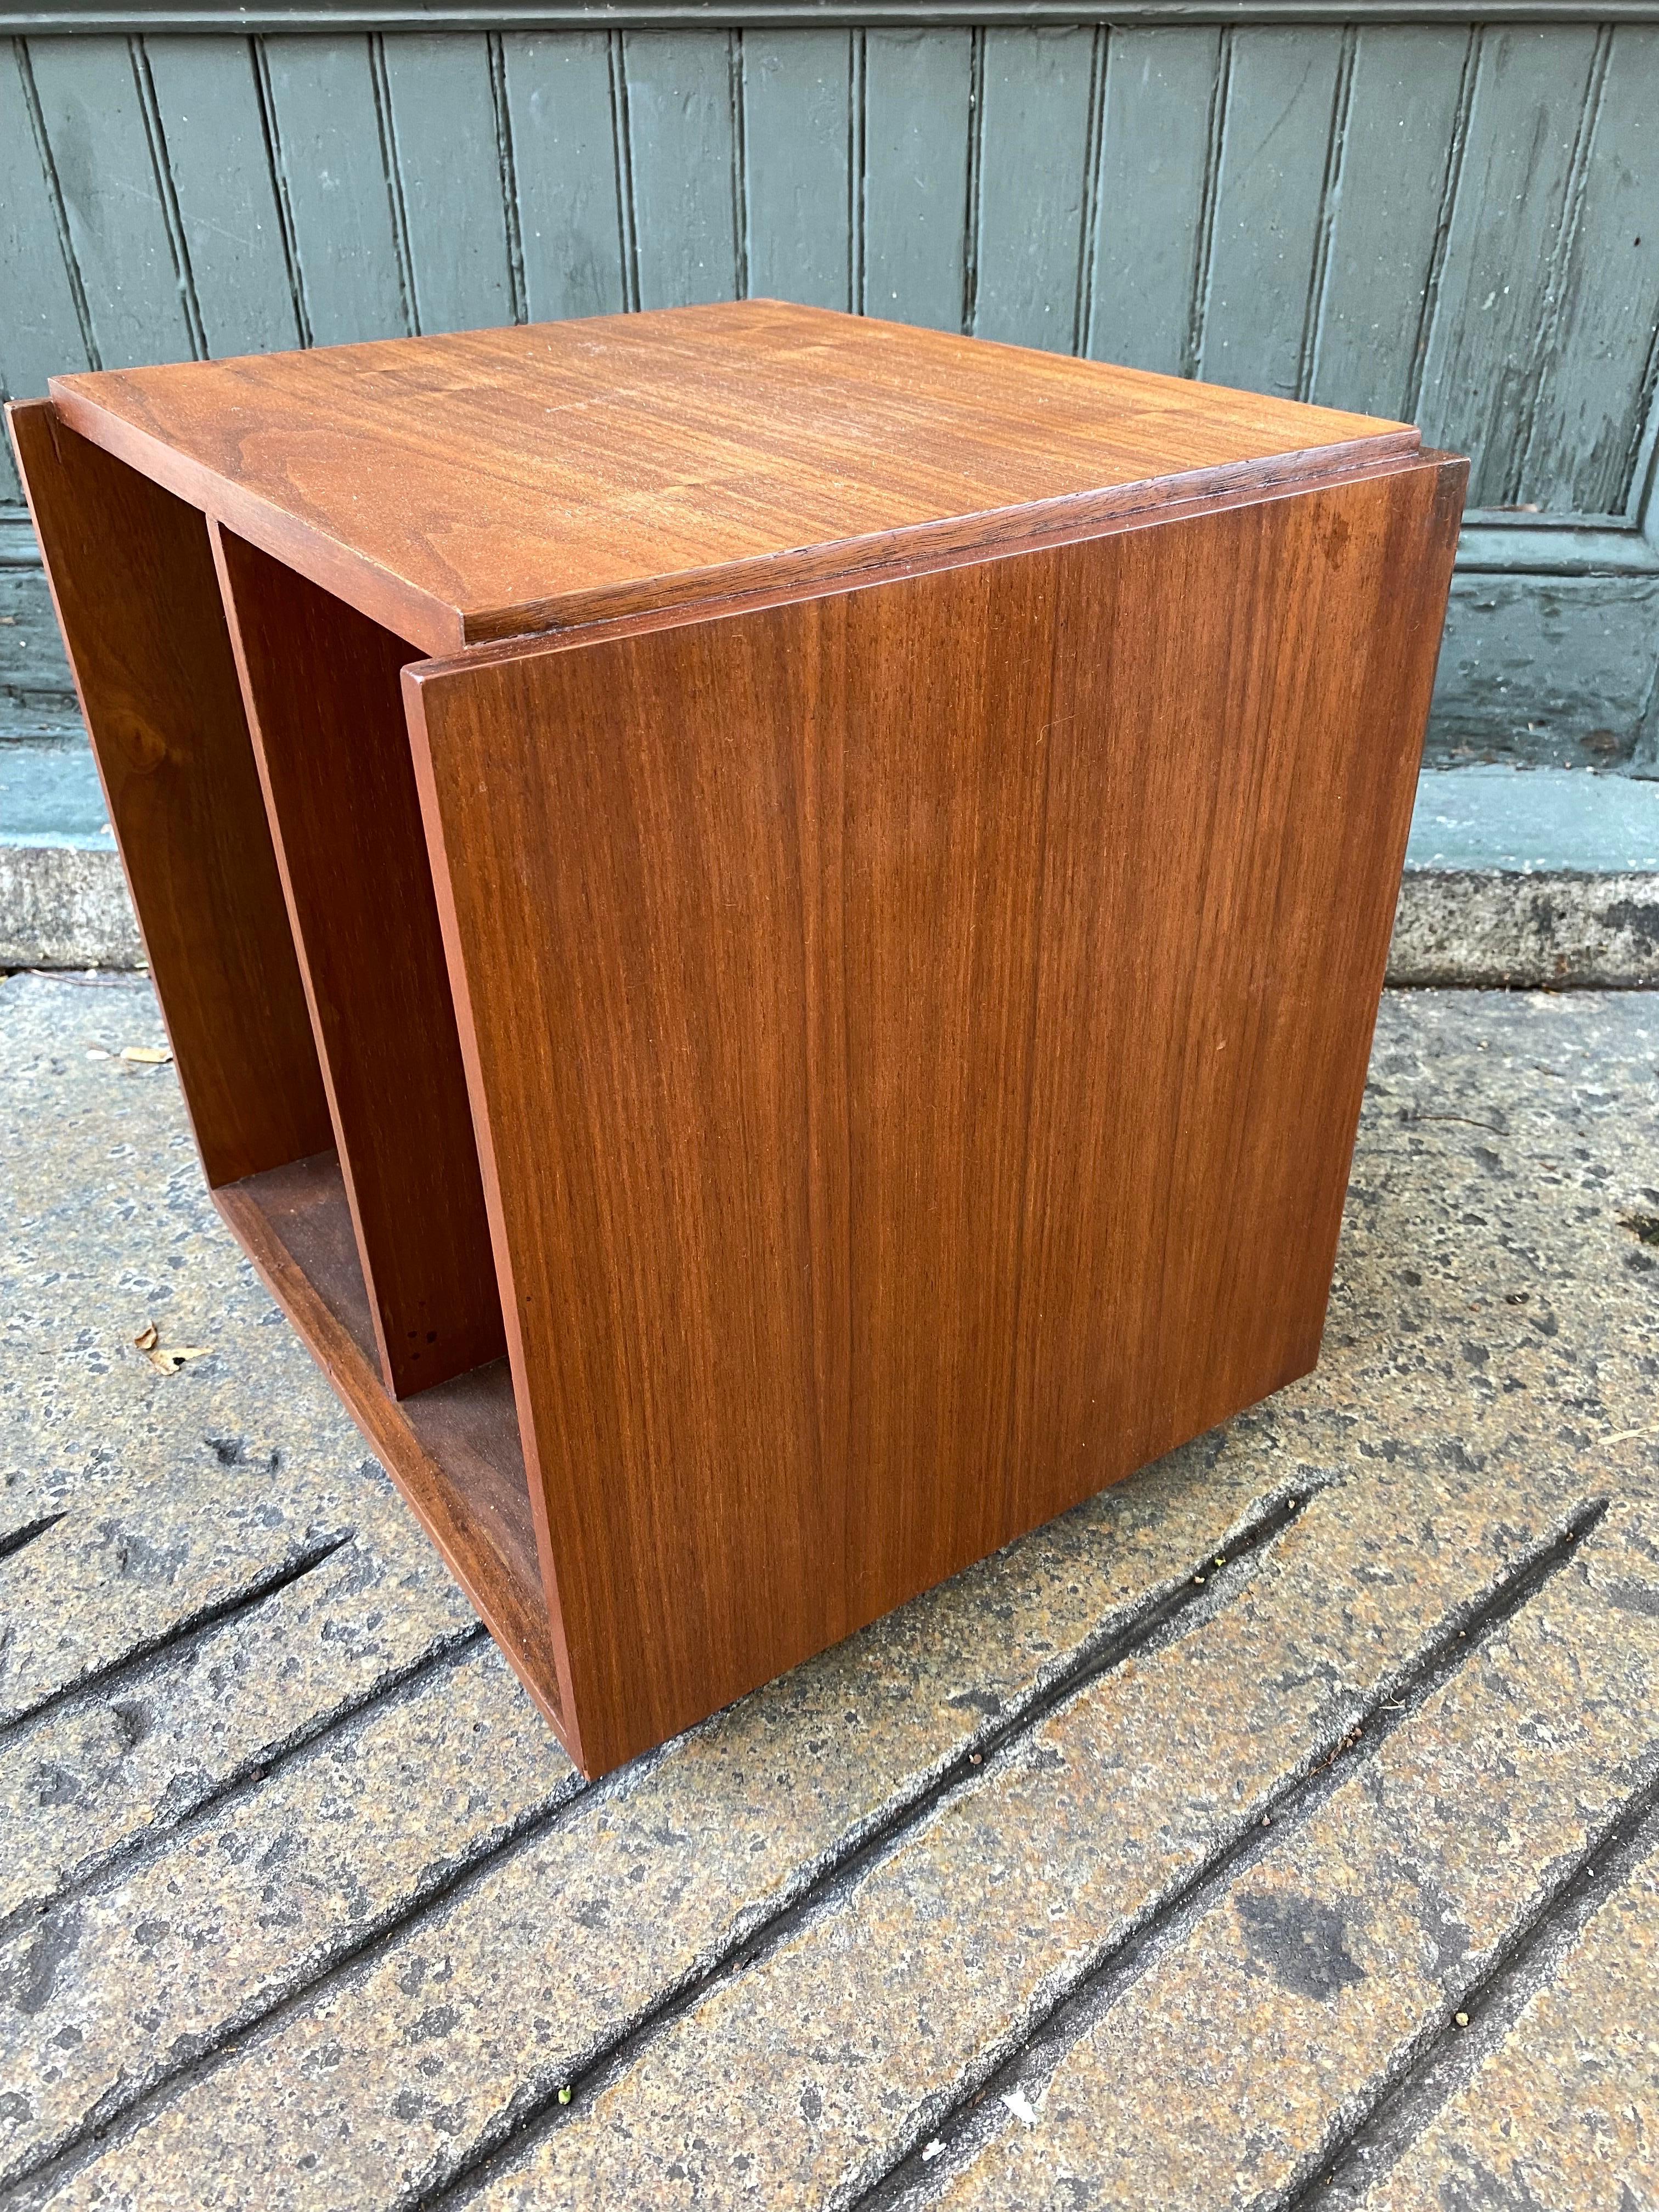 Paul Mayen Rotating teak box! Perfect for Records or books! Perfect simple design, can also be used as an end table. Classic useful Design!.